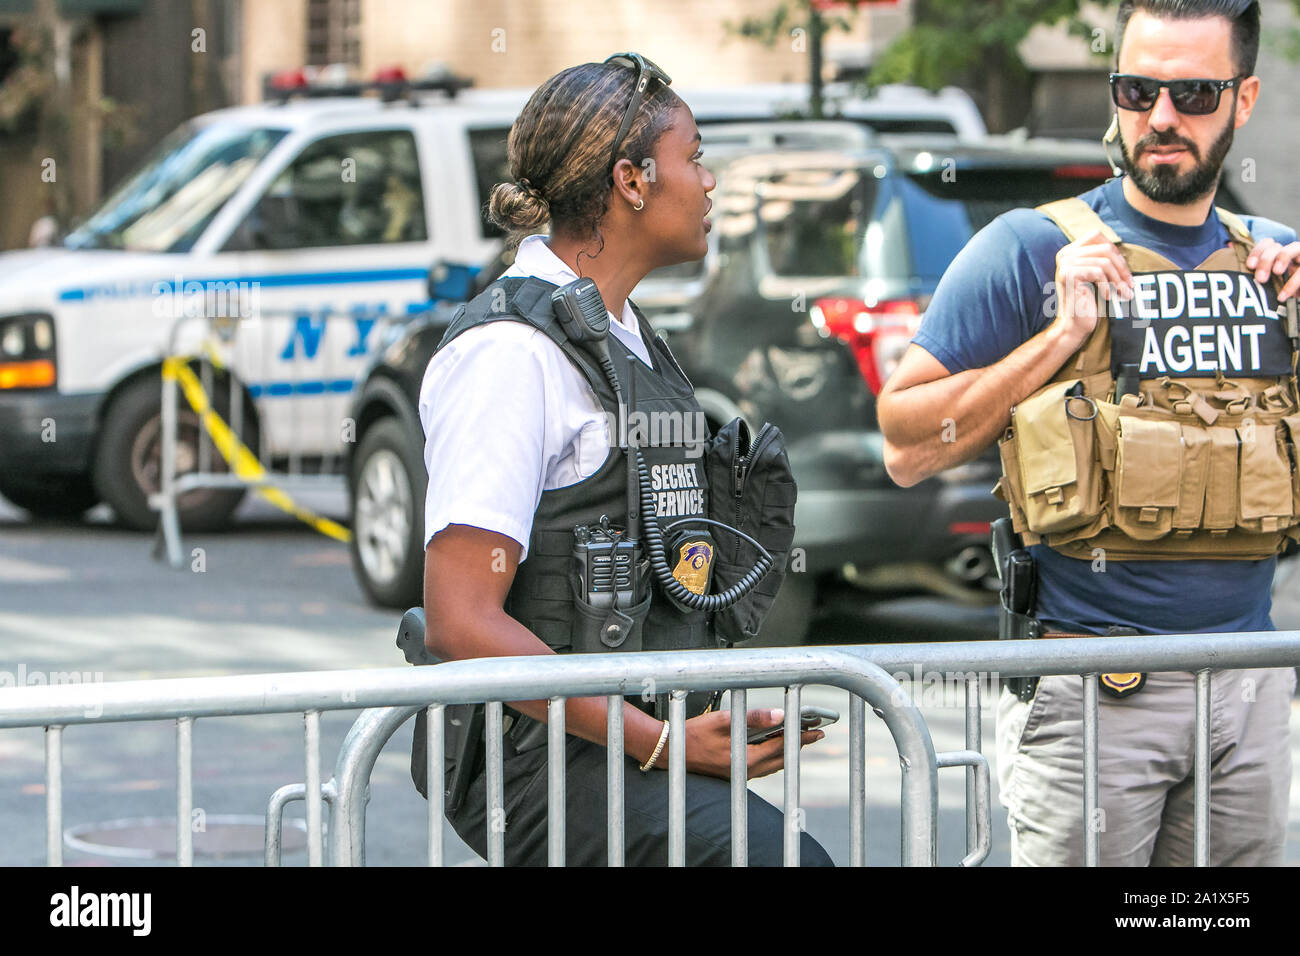 New York City, 9/27/2019: US federal agent and a Secret Service agent stand at a checkpoint in Manhattan during UN General Assembly. Stock Photo